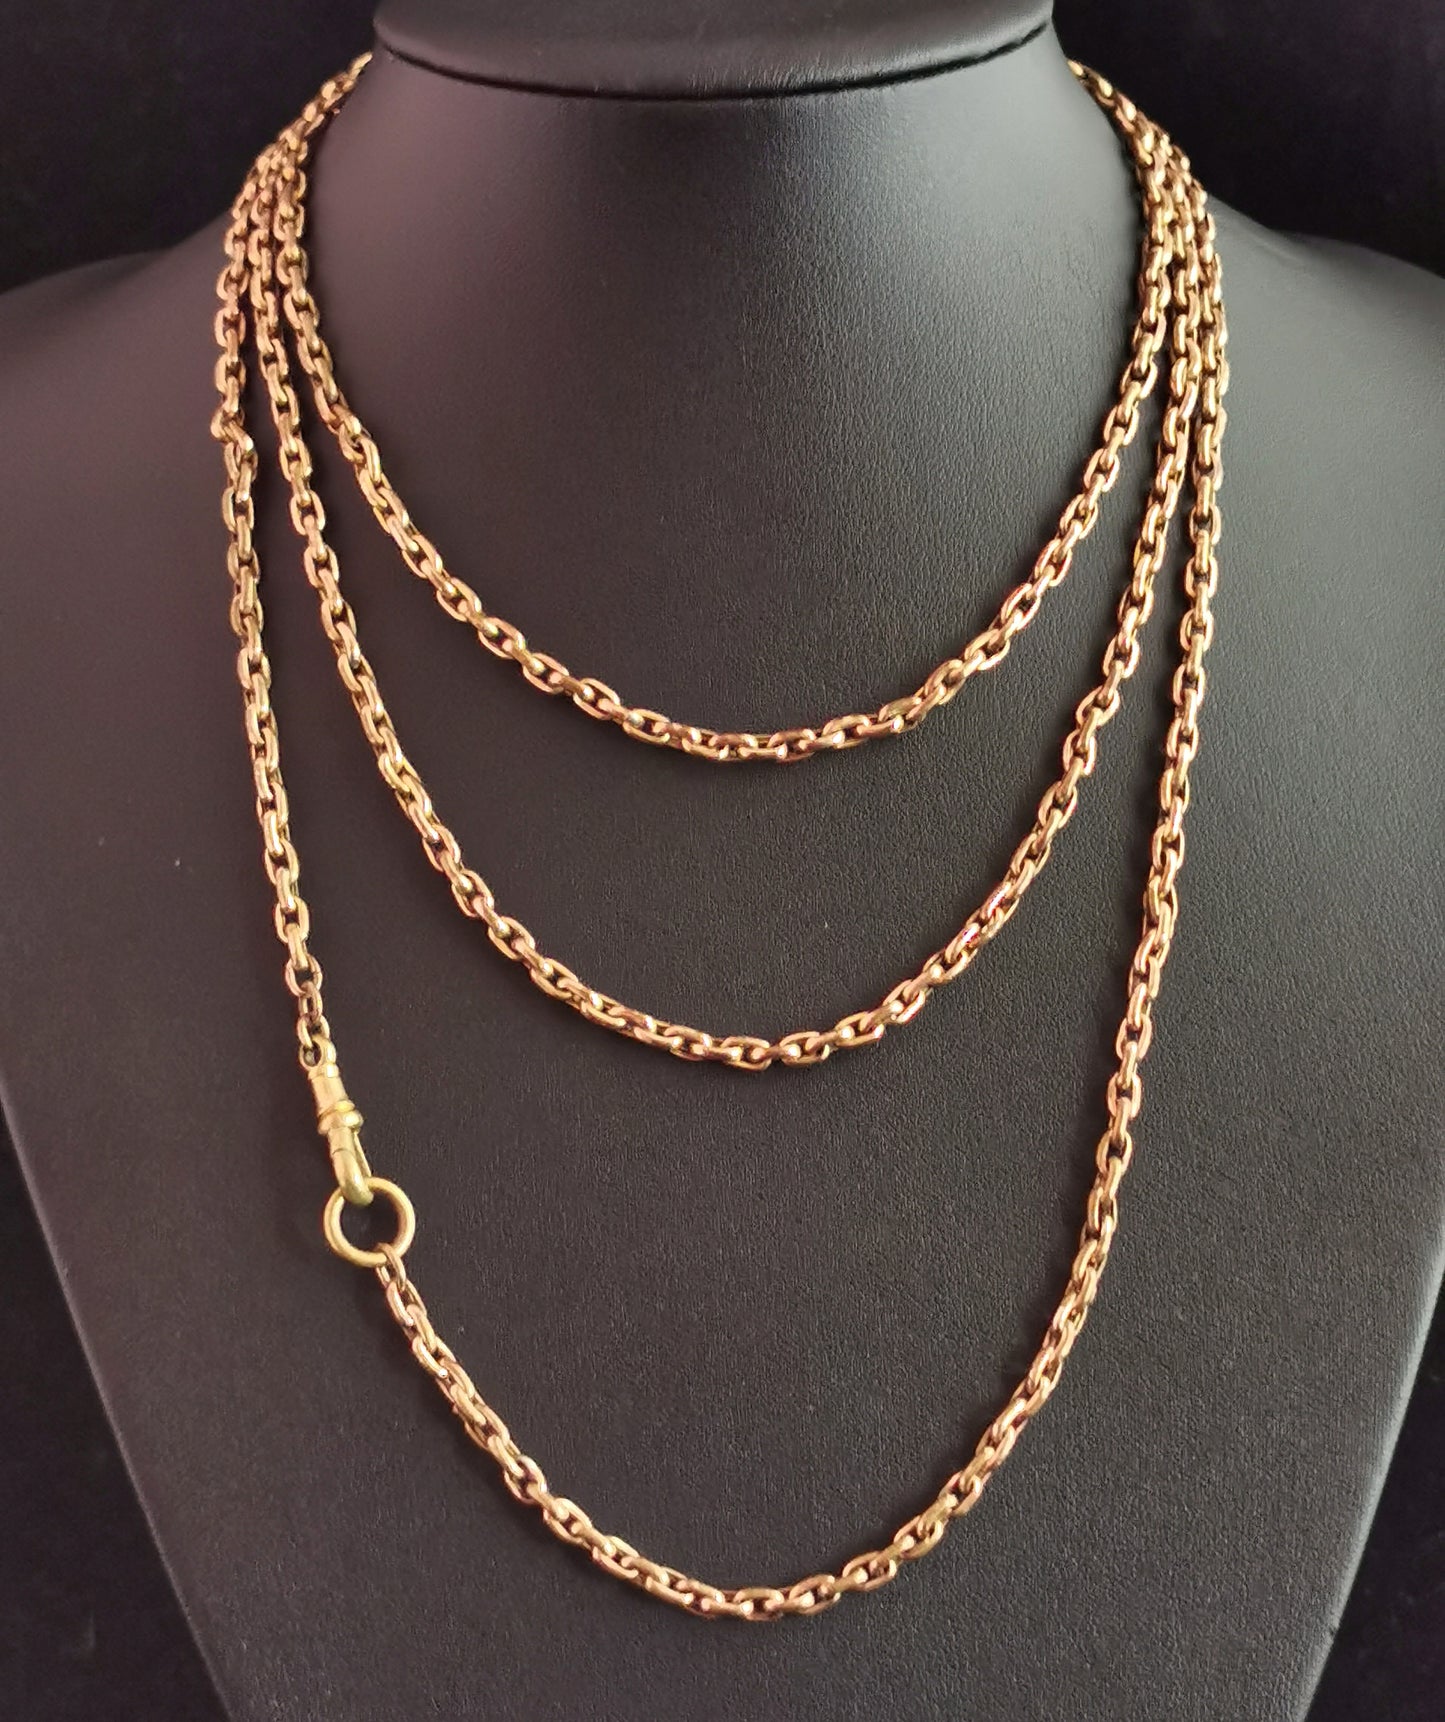 Antique Victorian gold plated longuard chain necklace, muff chain